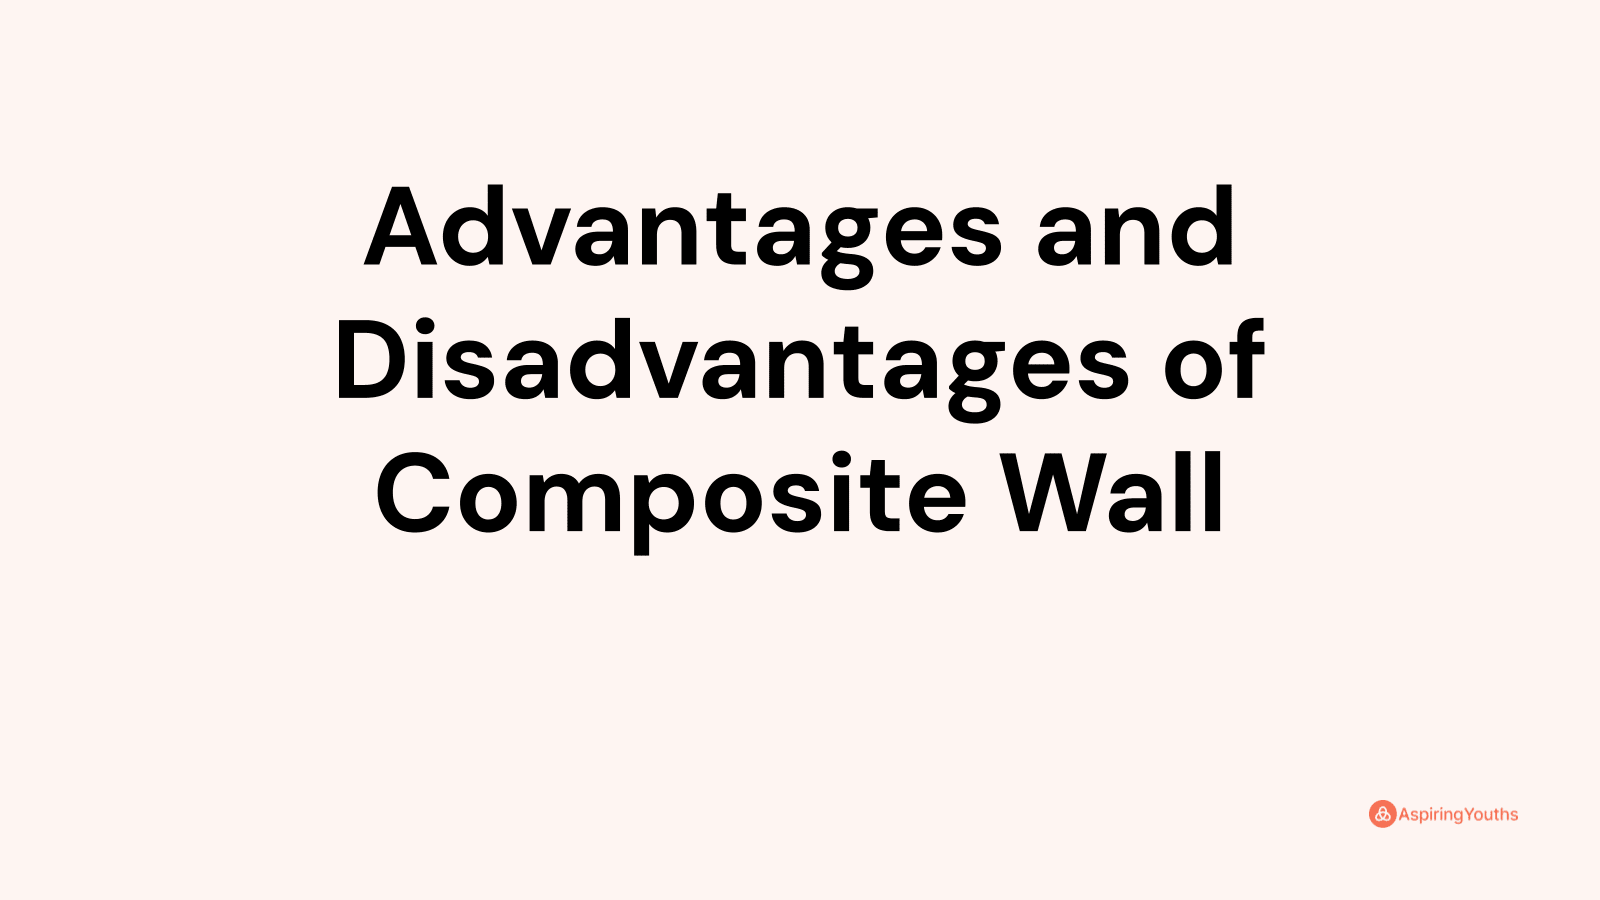 Advantages and disadvantages of Composite Wall